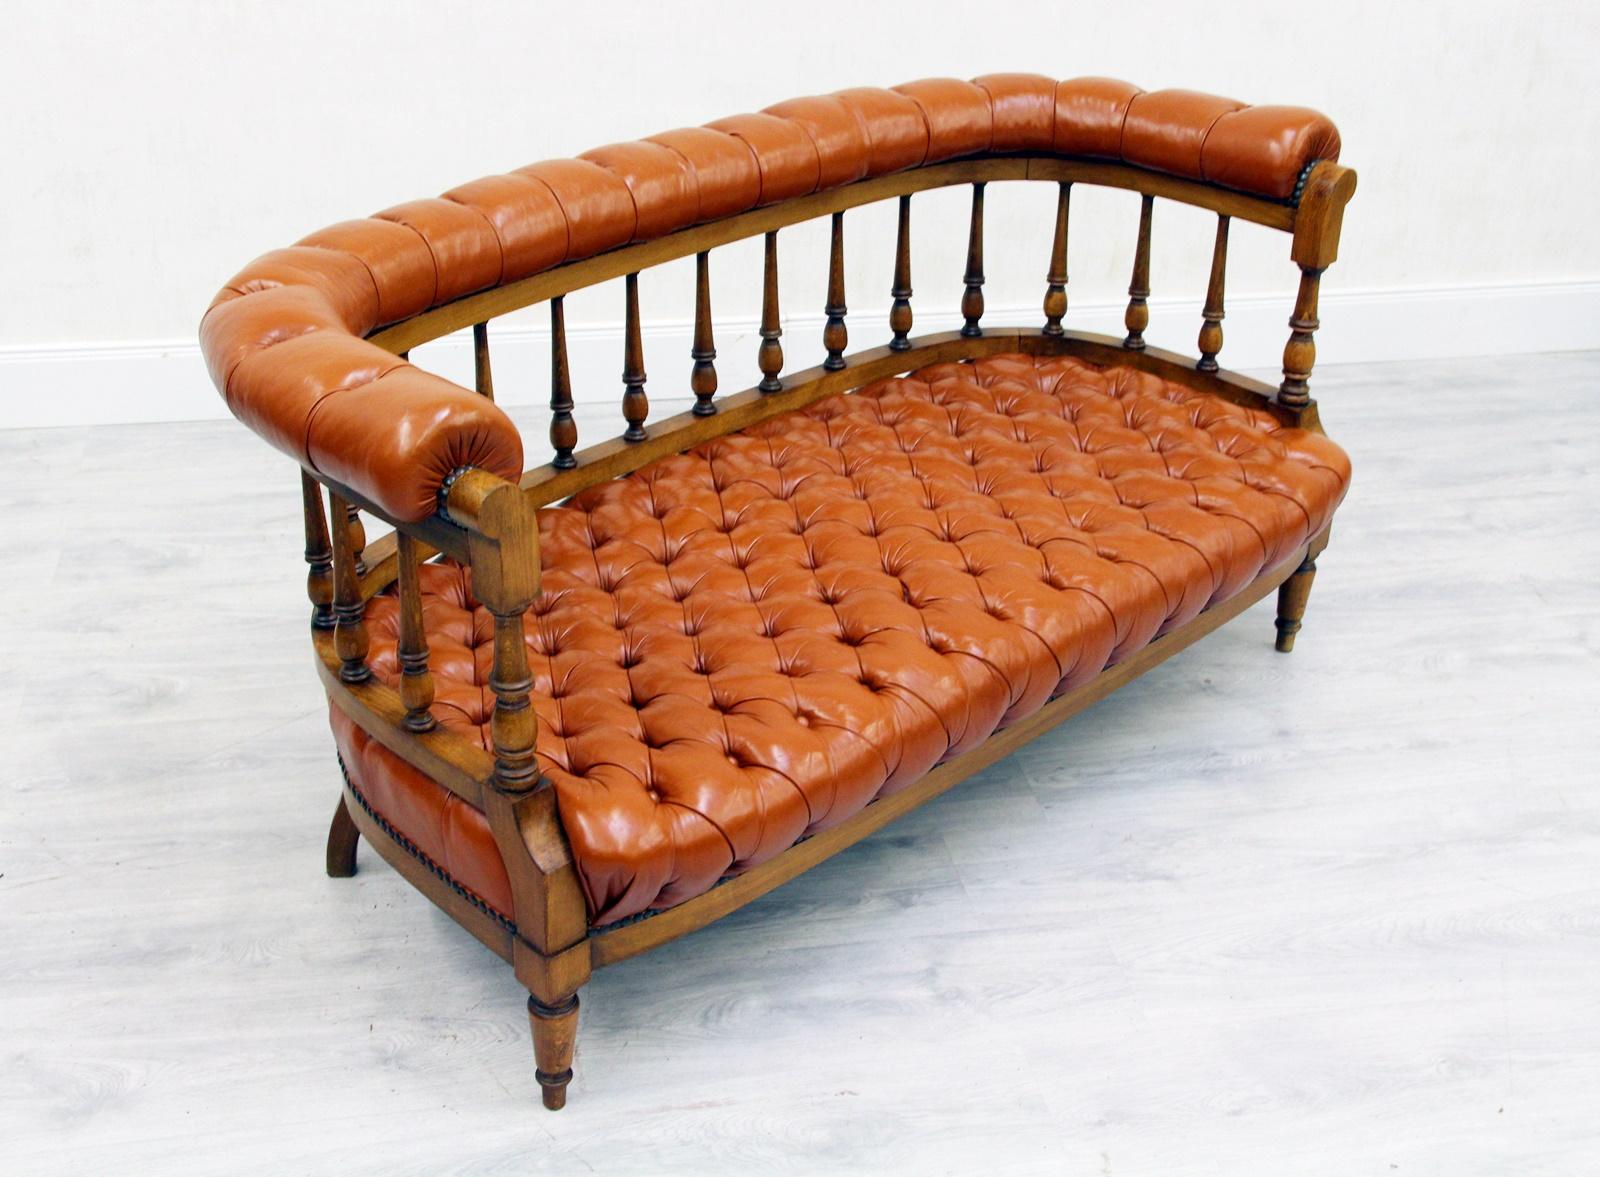 Chesterfield Vintage Chippendale English Sofa Leather Antique Couch im Angebot 1